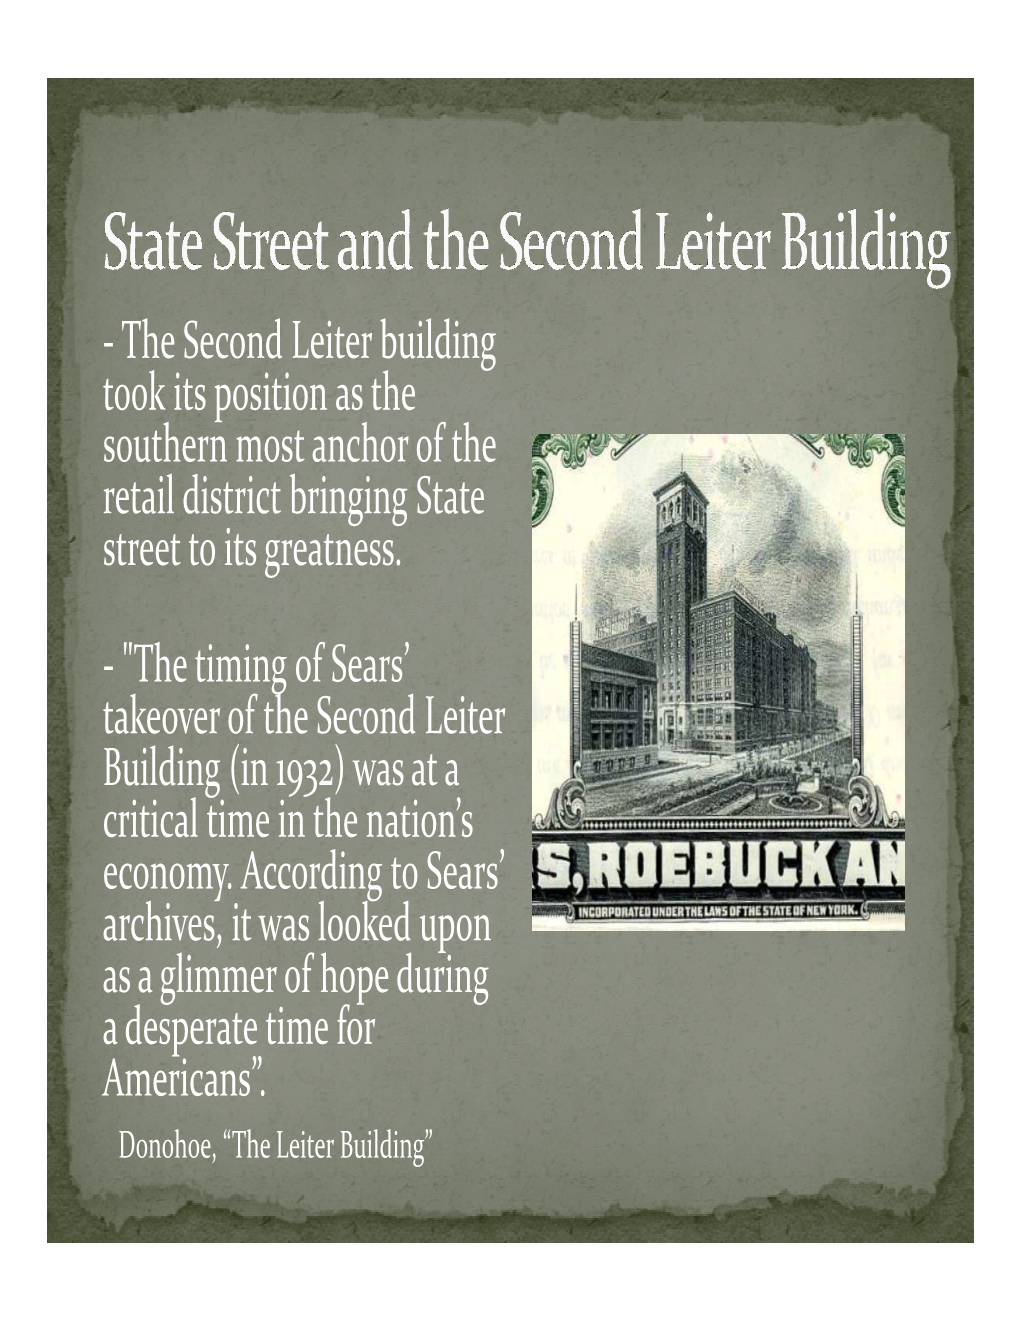 The Second Leiter Building Took Its Position As the Southern Most Anchor of the Retail District Bringing State Street to Its Greatness